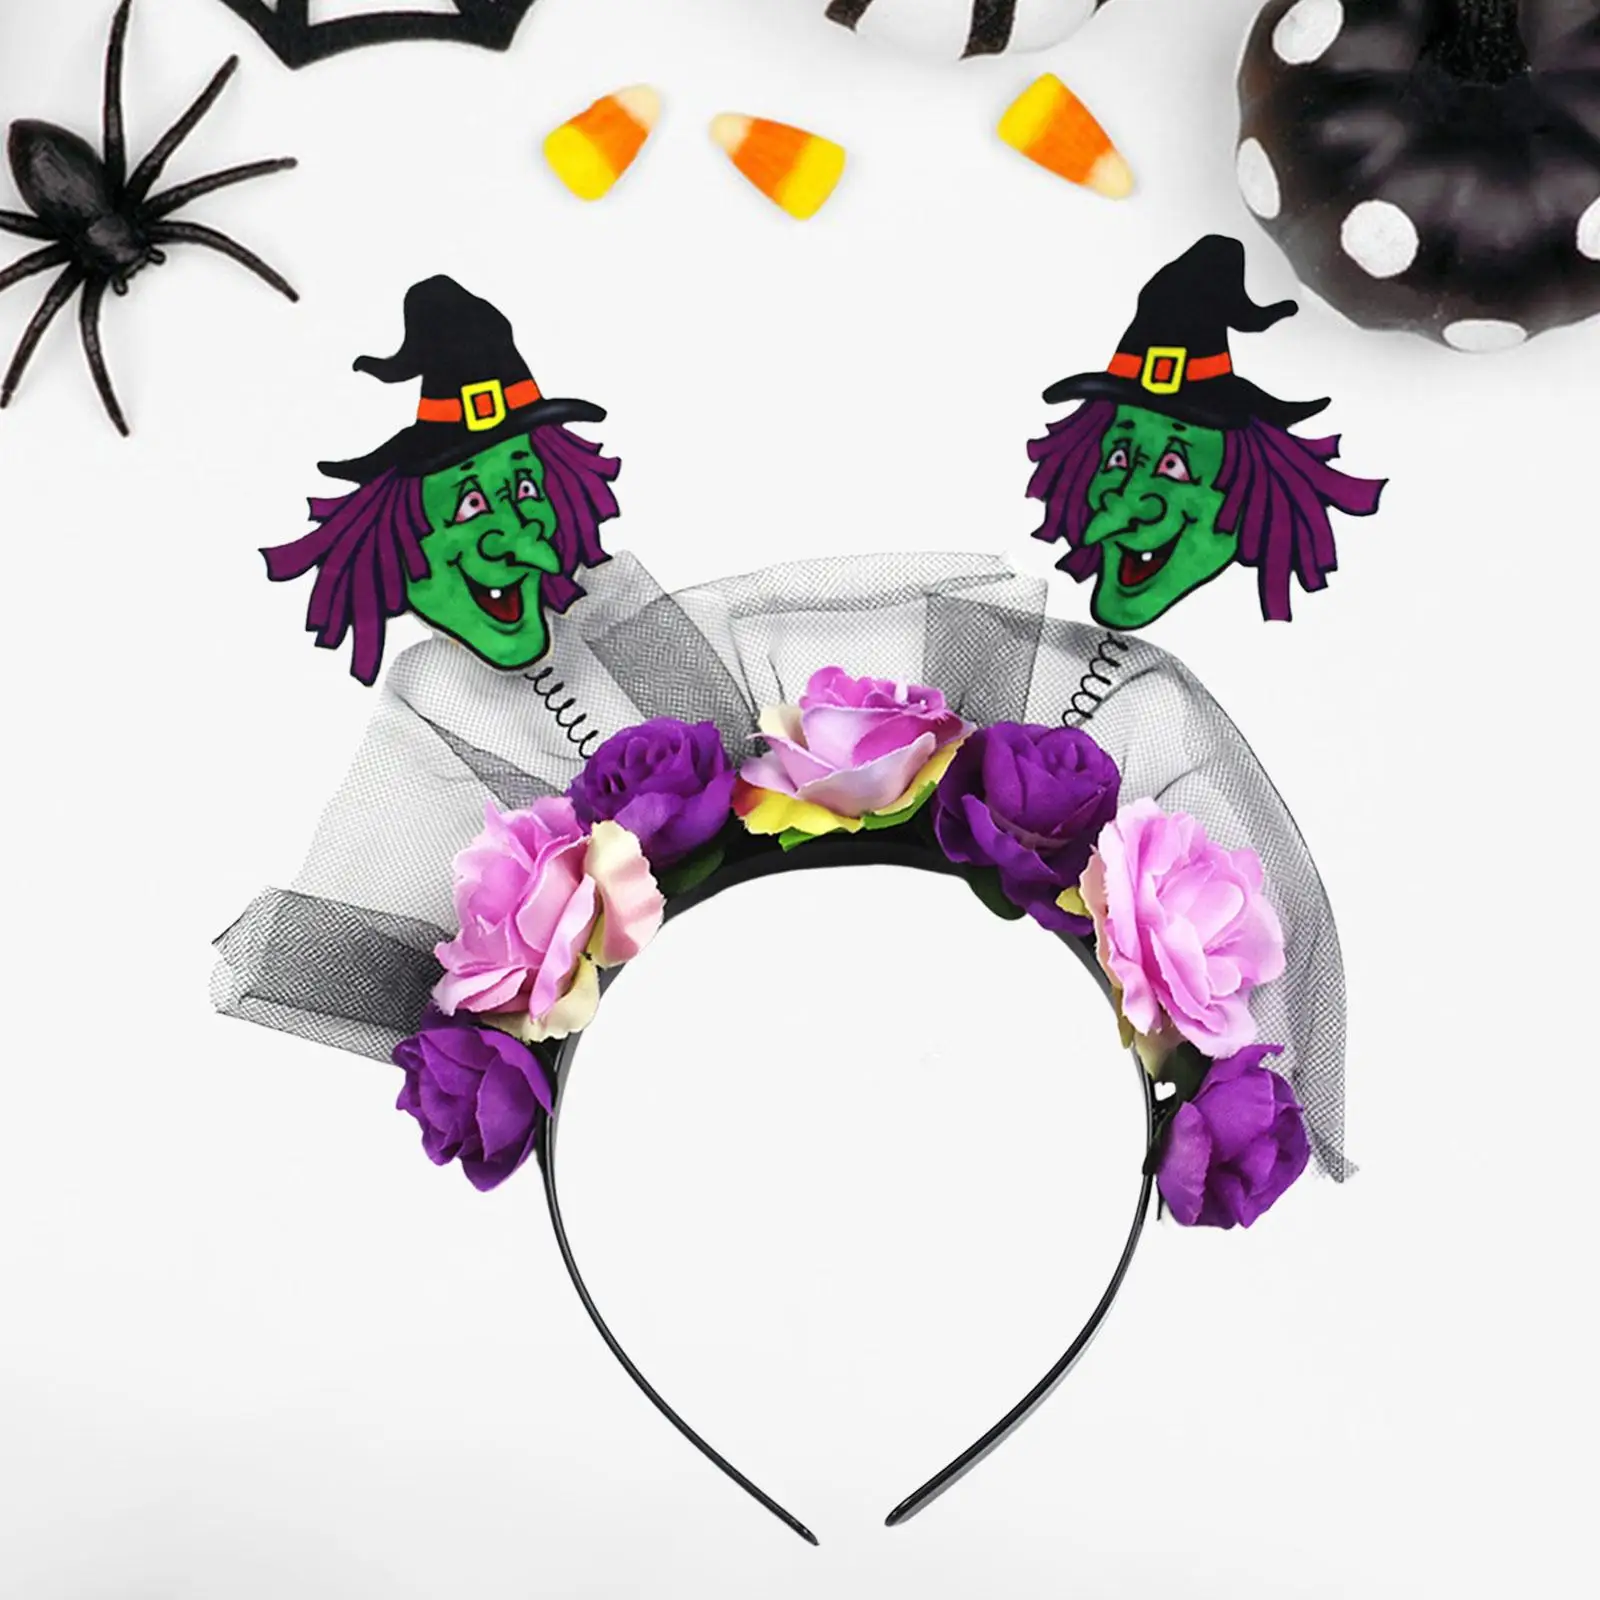 Halloween Headband Cosplay Flower Headpiece Costume Dress up Hair Hoop Headwear for Role Play Carnival Masquerade Party Supplies